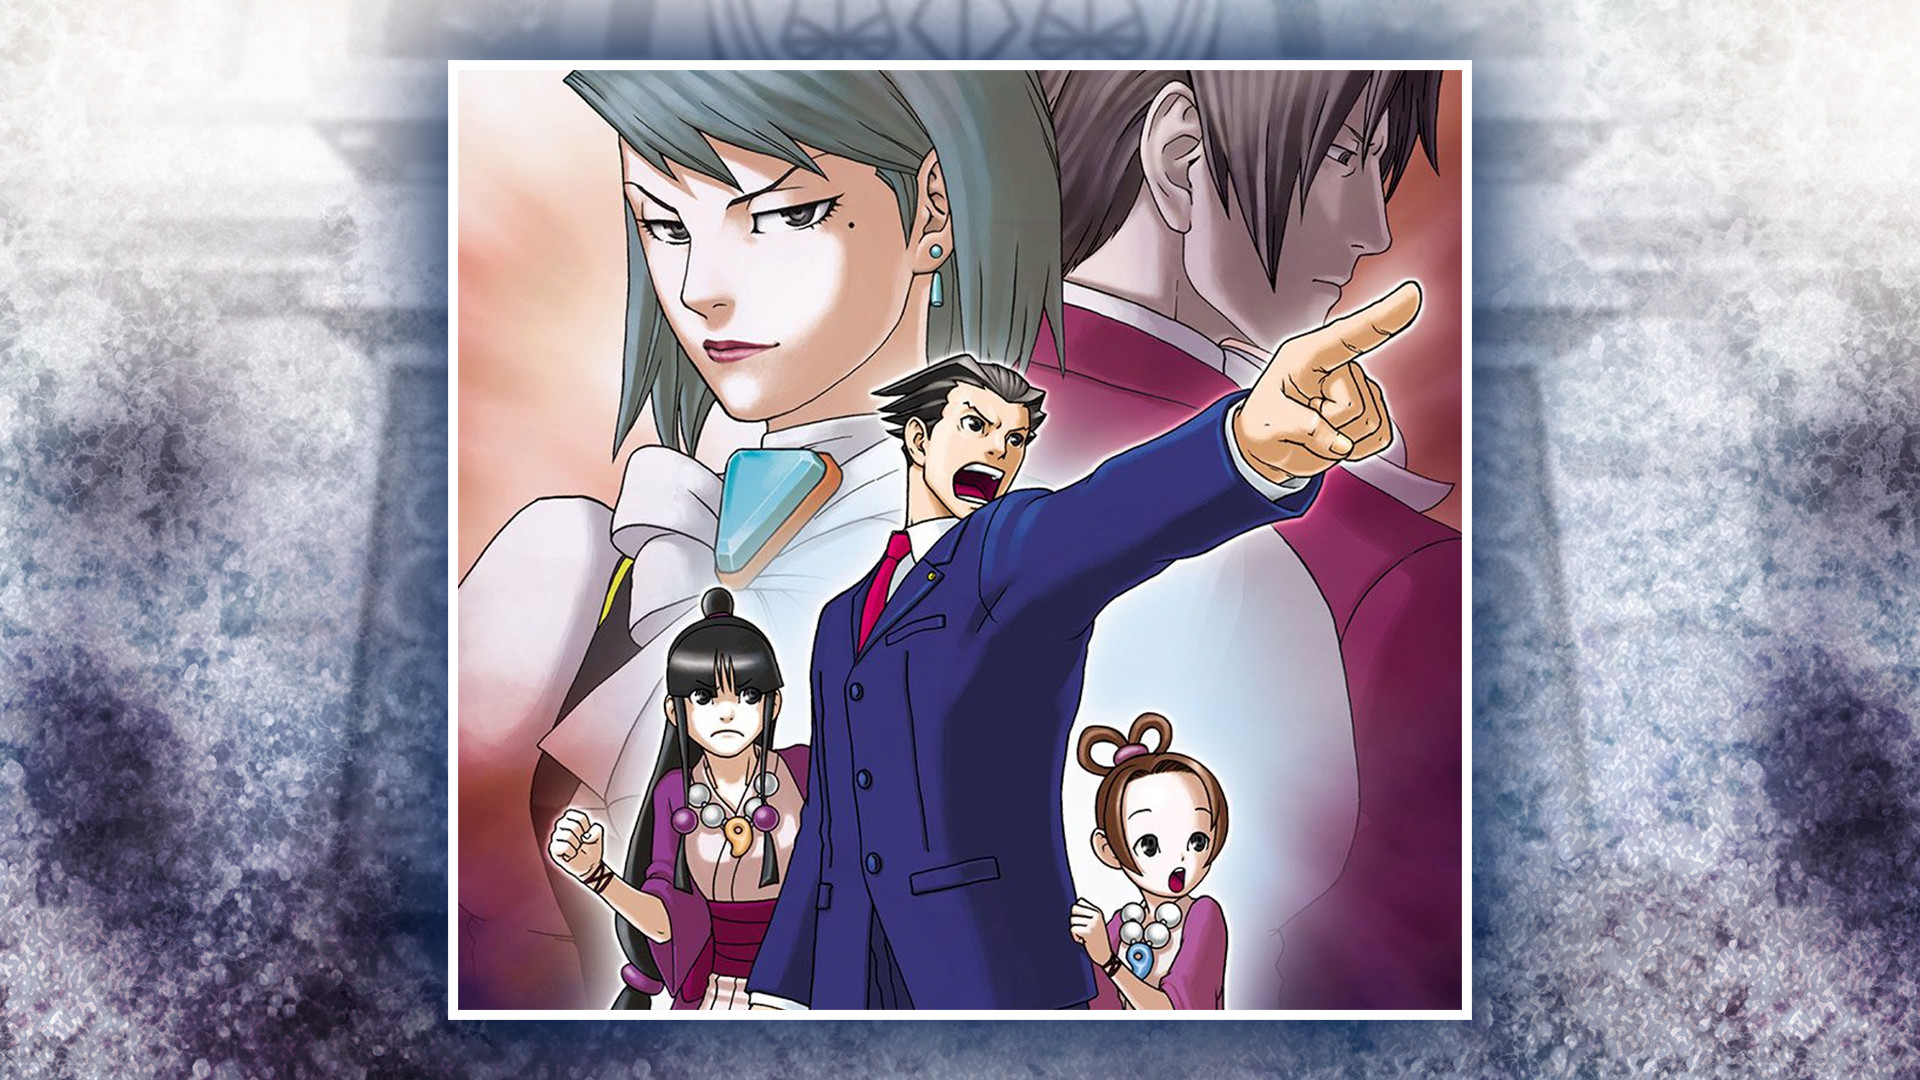 Phoenix Wright: Ace Attorney - Justice for All Original Soundtrack Featured Screenshot #1